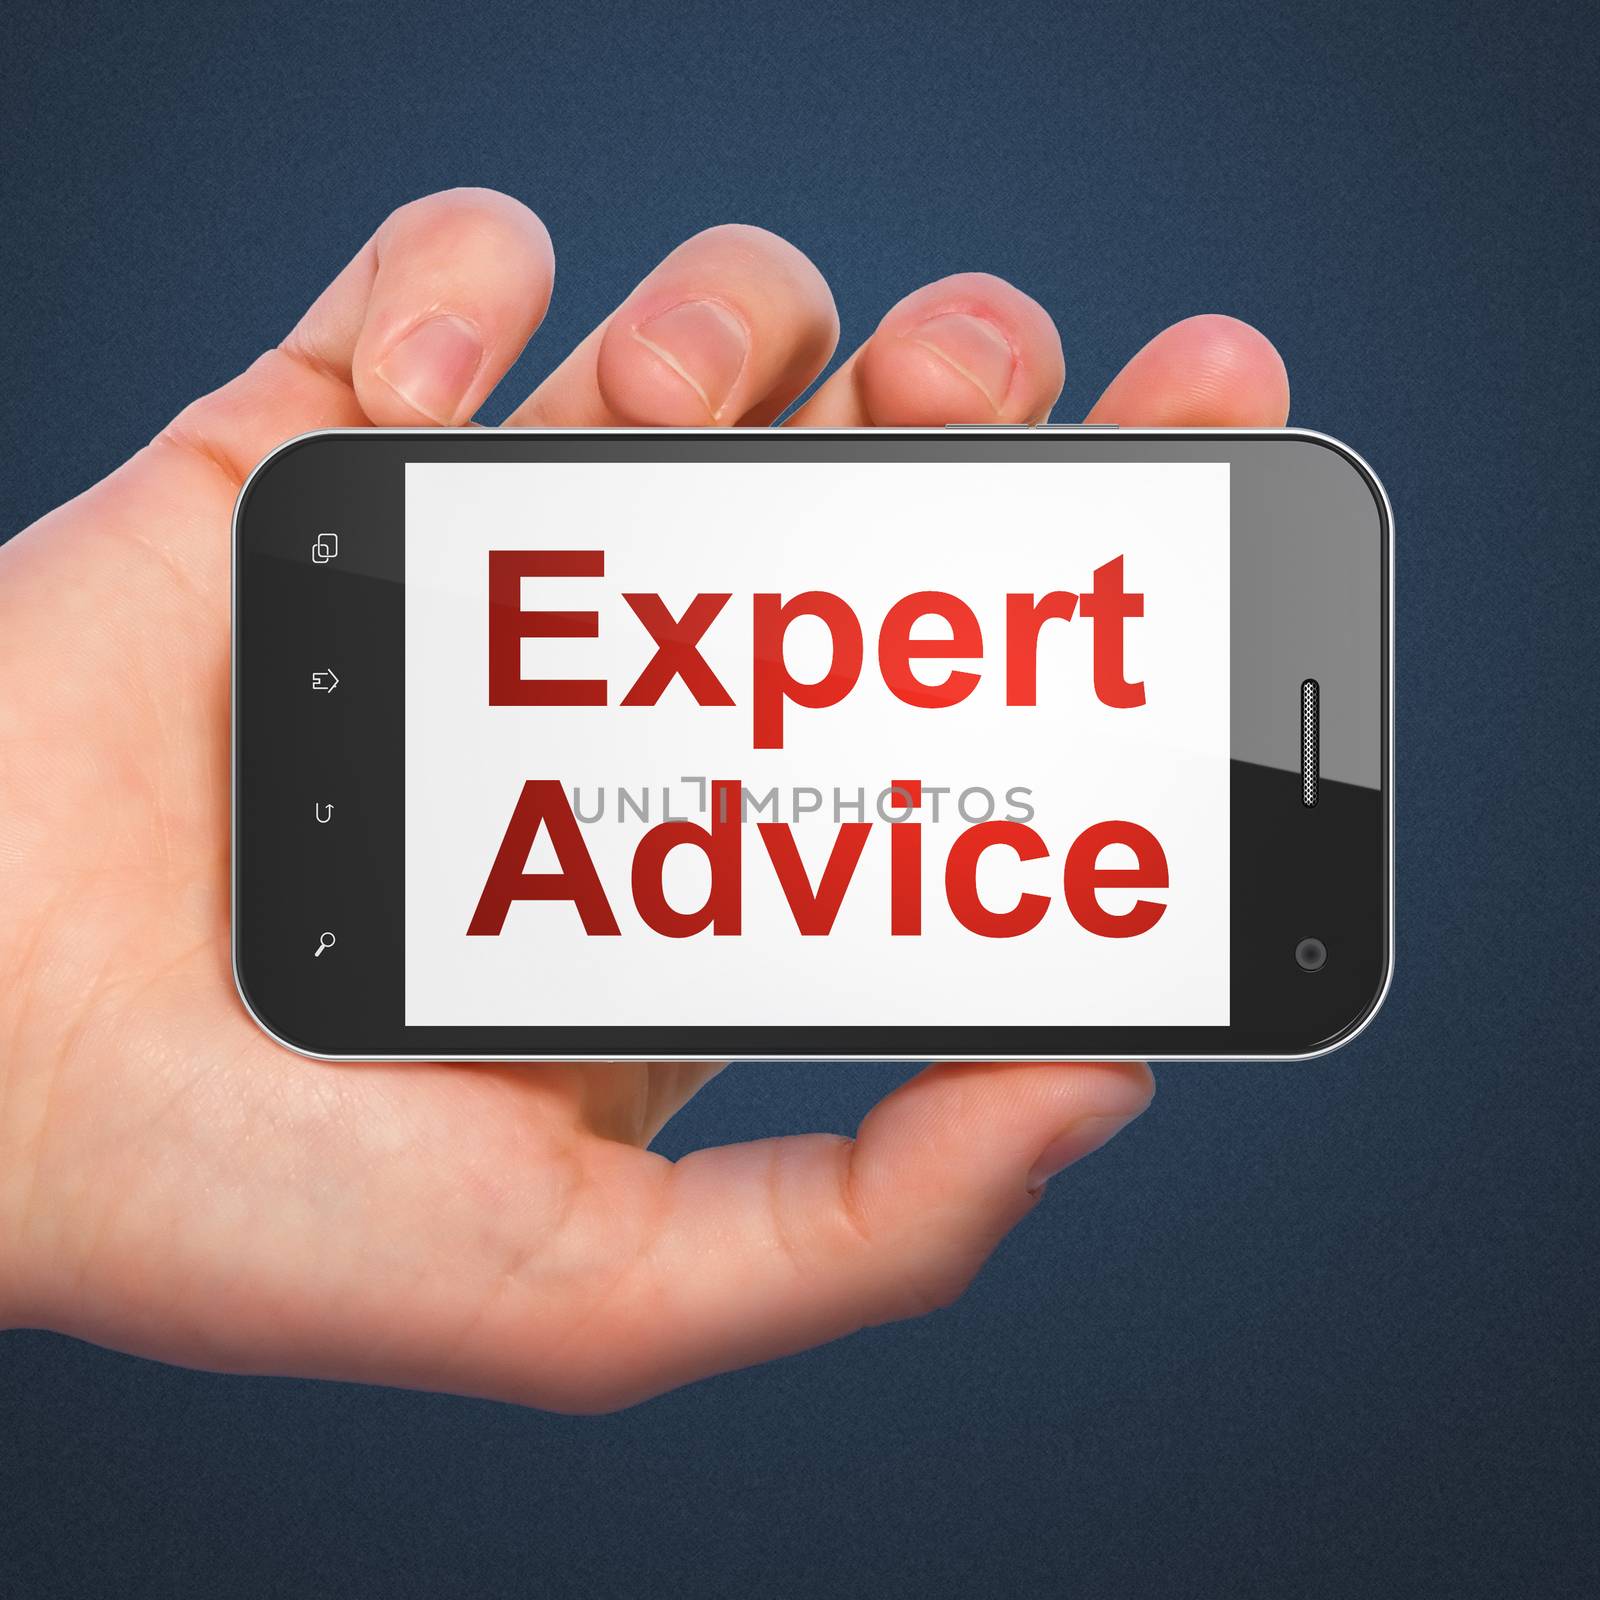 Law concept: Expert Advice on smartphone by maxkabakov